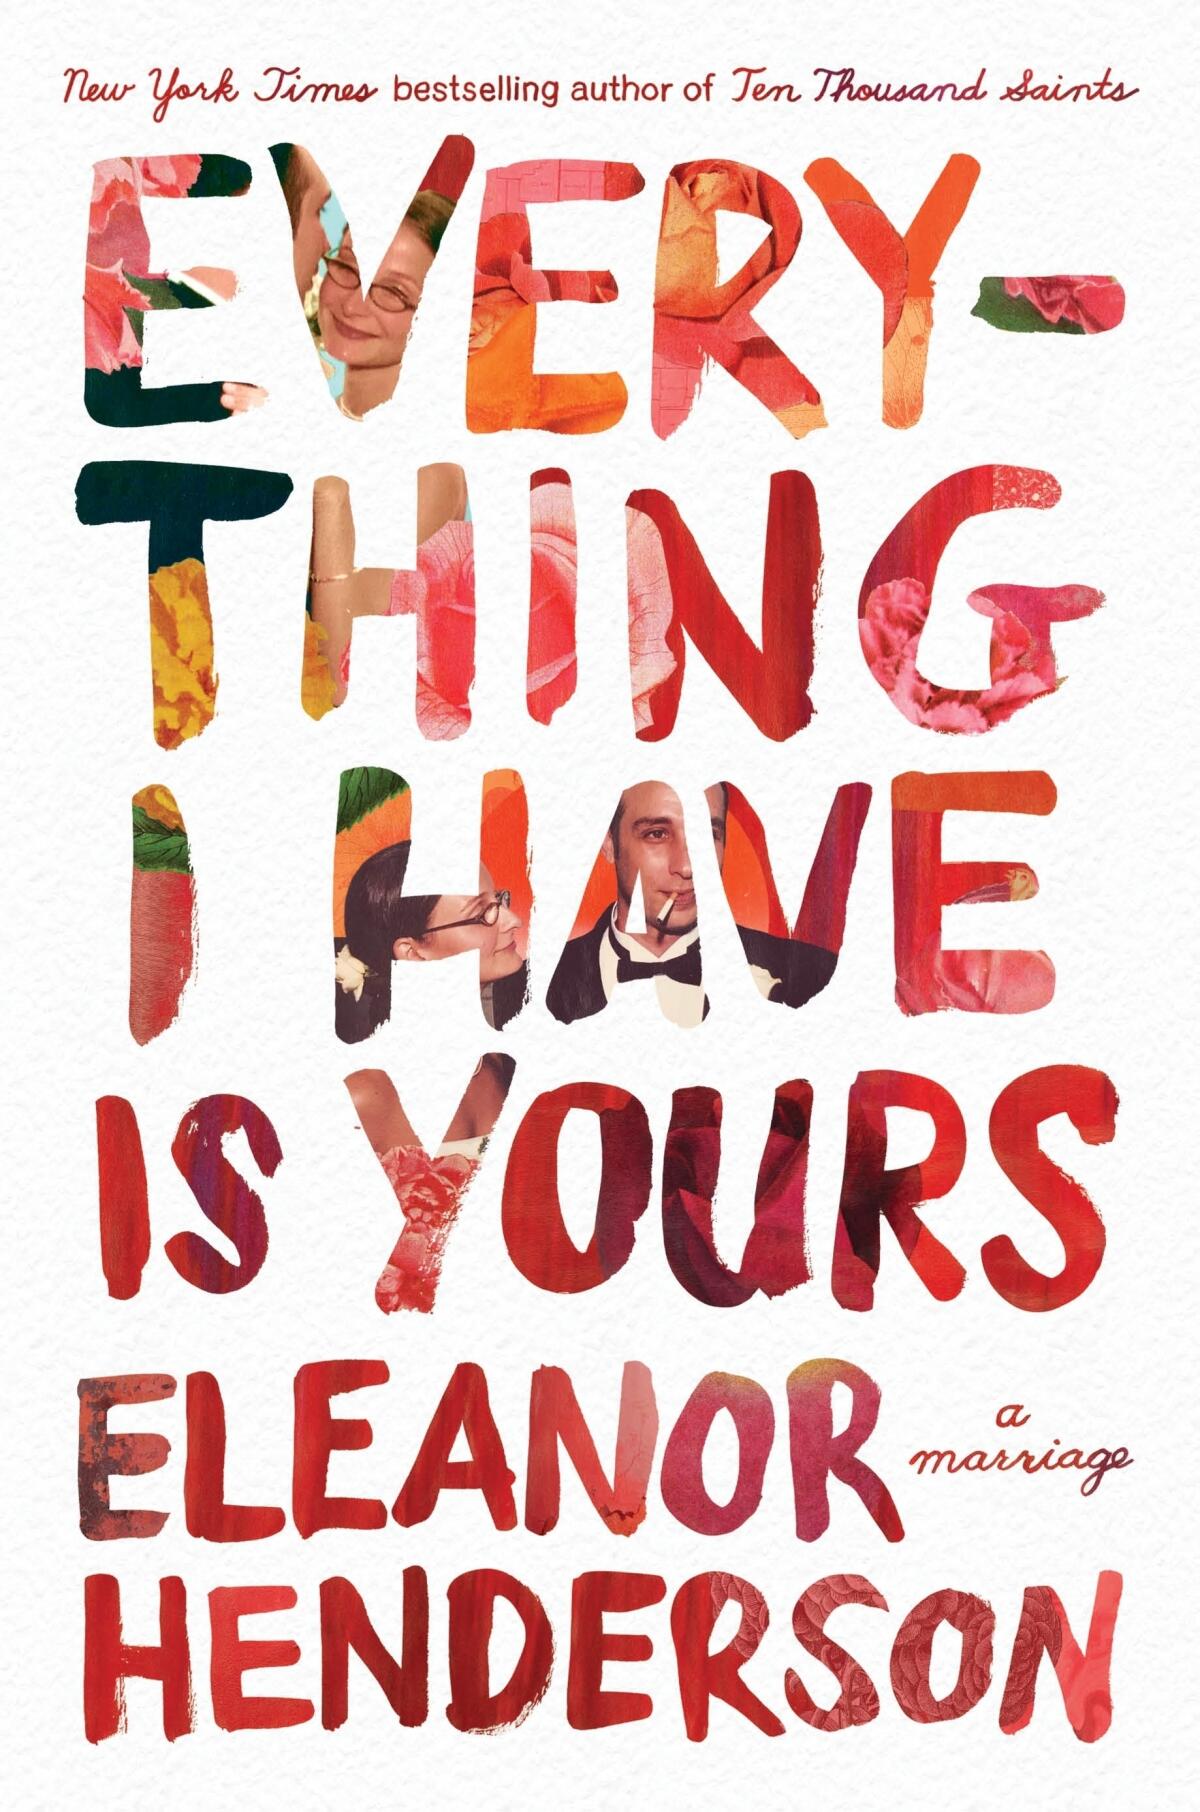 This cover image released by Flatiron Books shows "Everything I Have is Yours: A Marriage" by Eleanor Henderson. (Flatiron Books via AP)